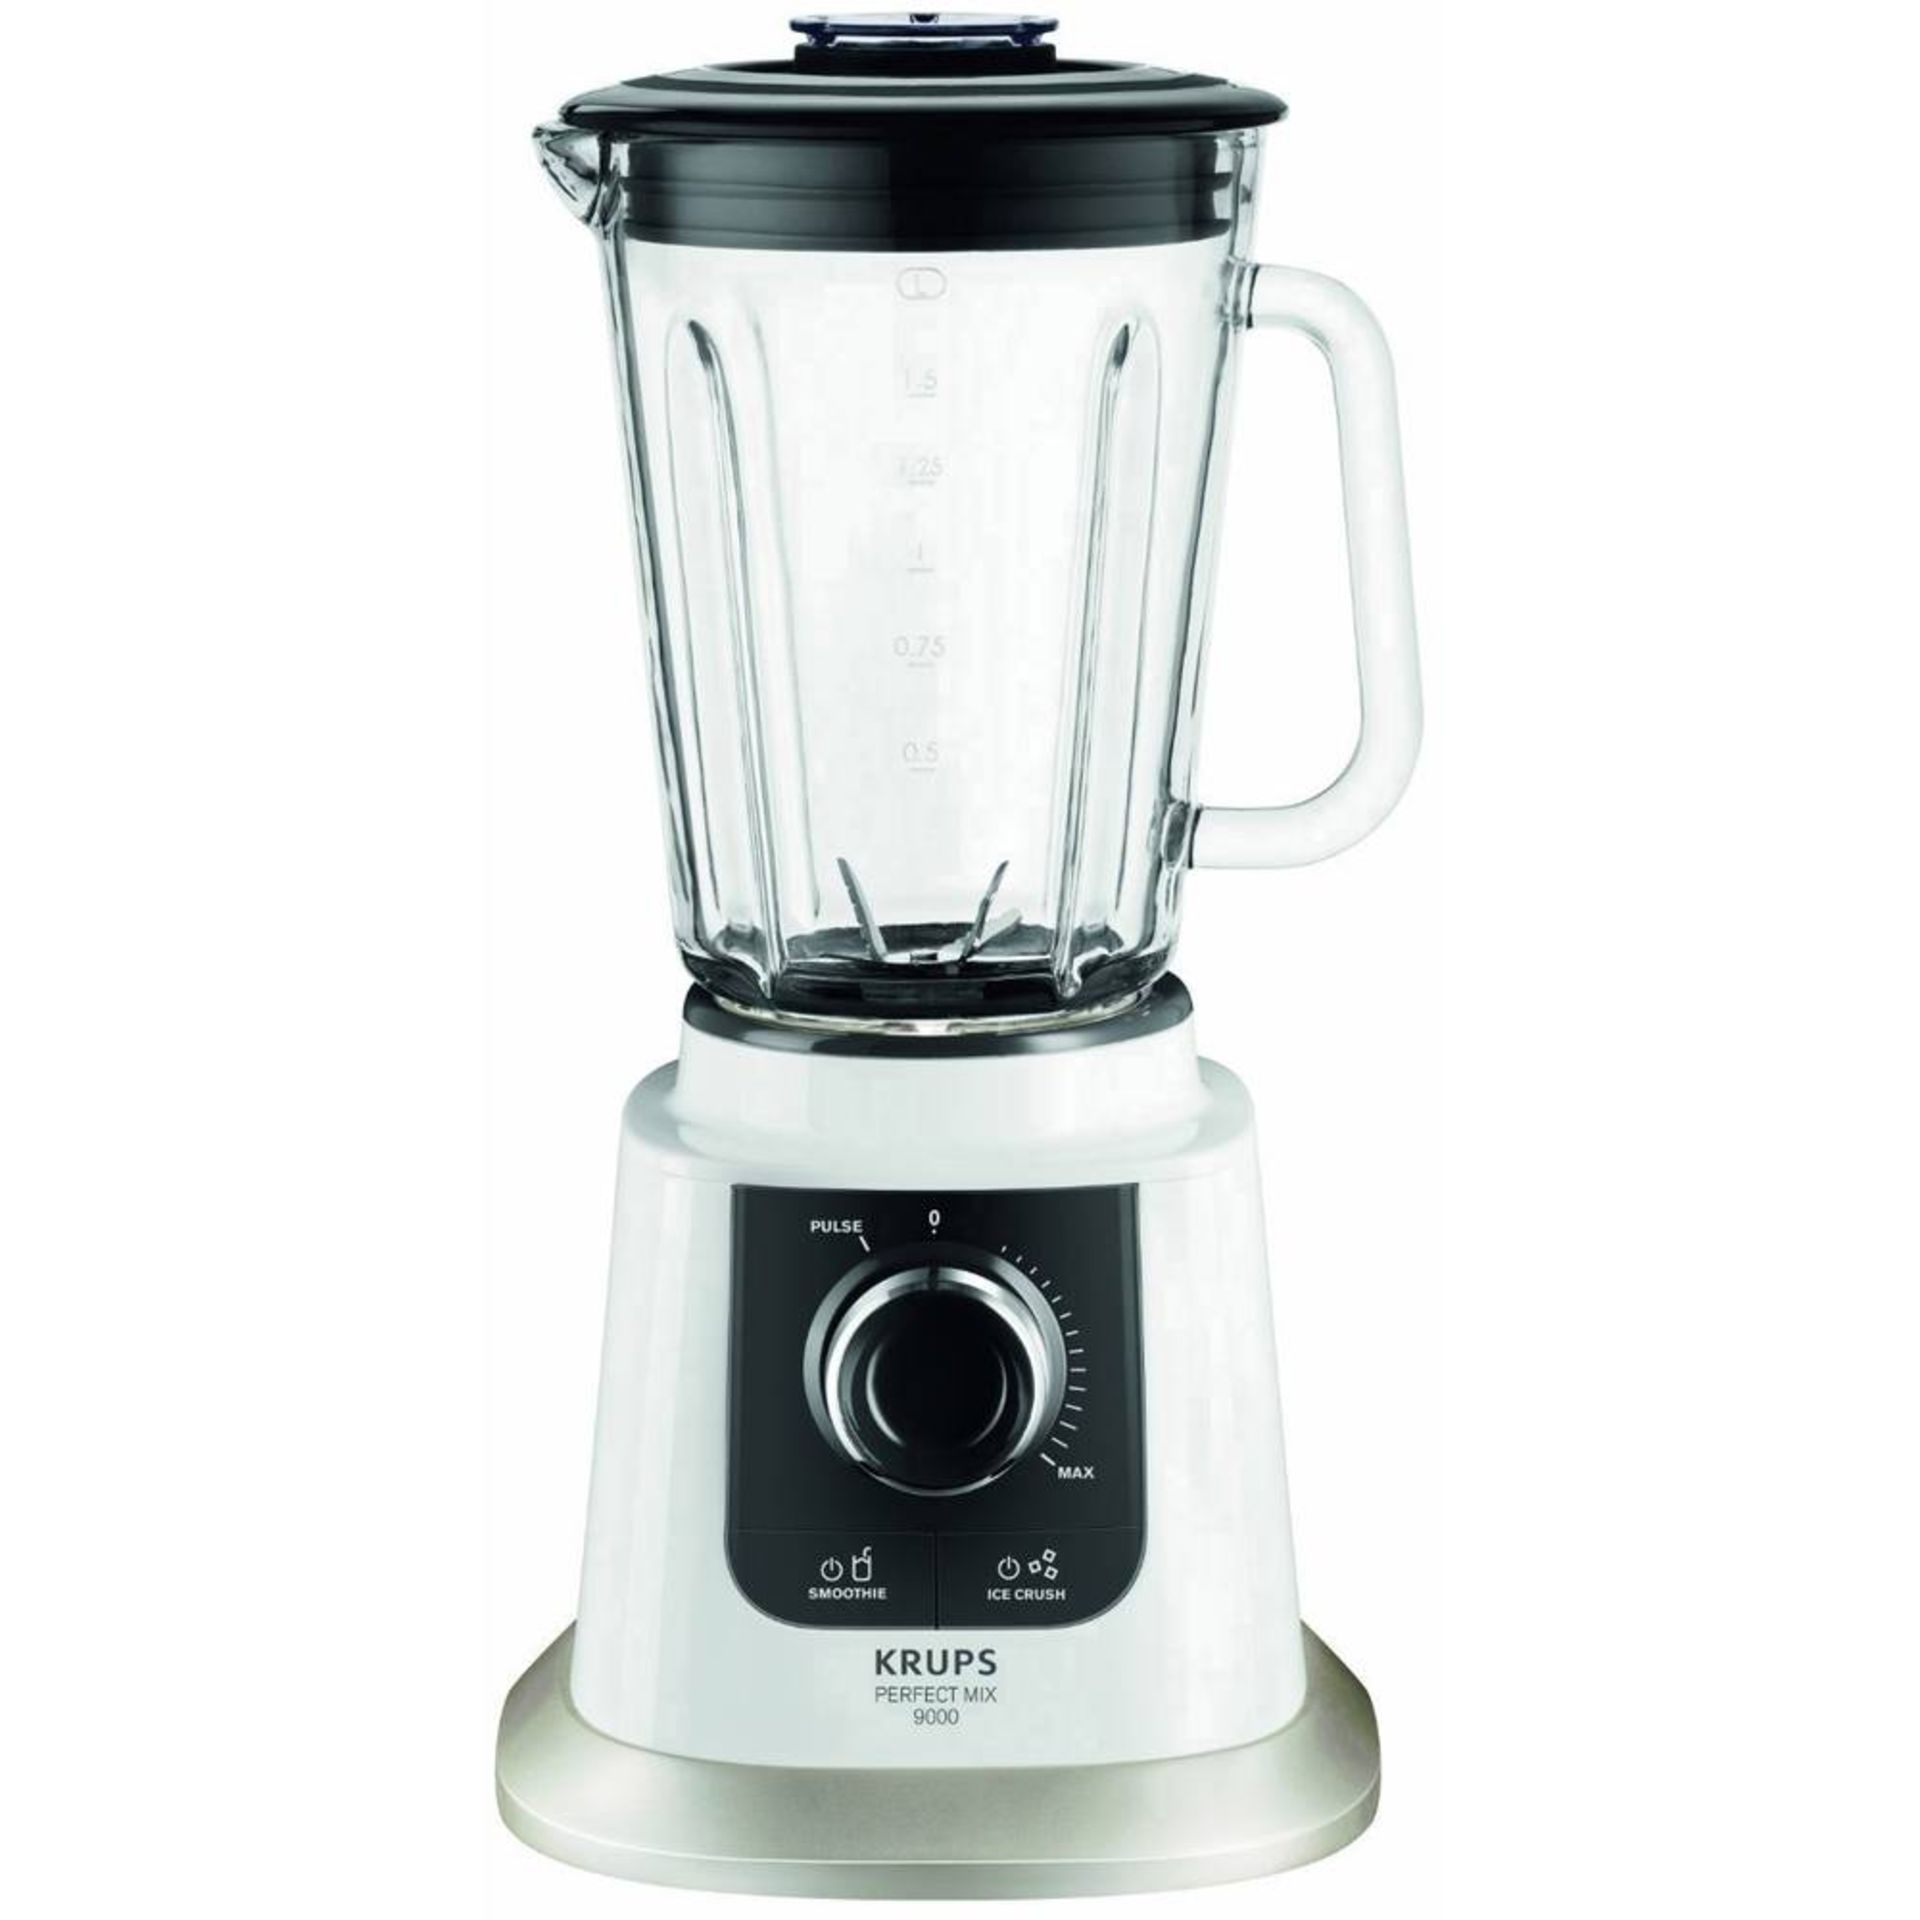 V Brand New Krups 850W Perfect Mix 9000 Blender - Multiple Functions Inc Ice Crush/Smoothie - 6